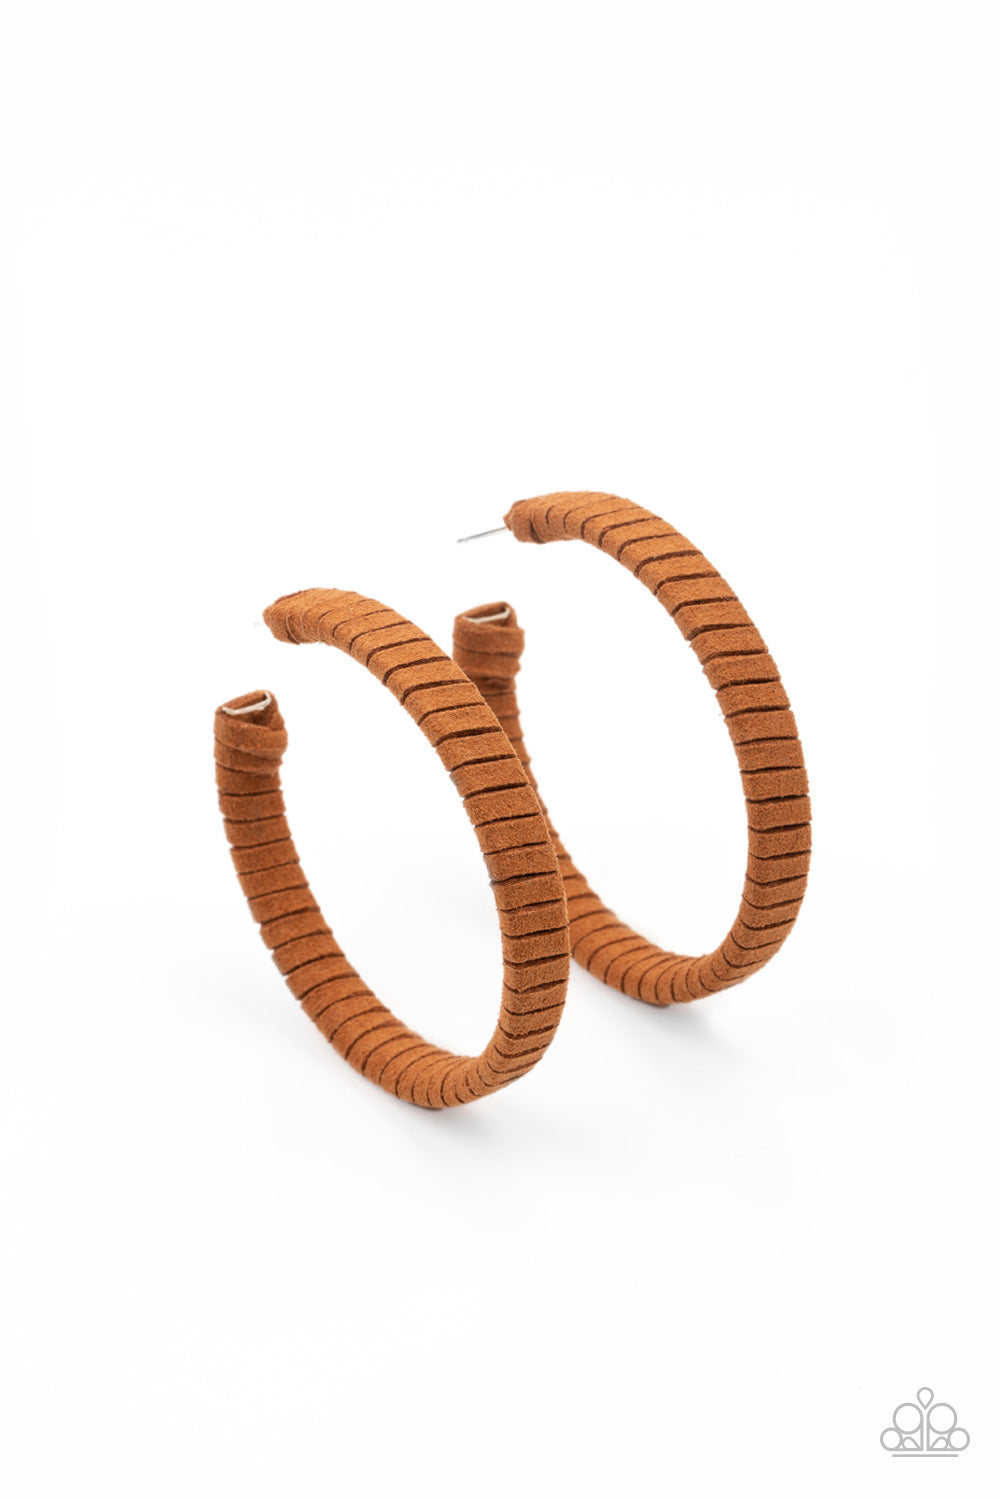 Tan suede cording wraps around an oversized hoop, creating an earthy pop of color. Earring attaches to a standard post fitting.